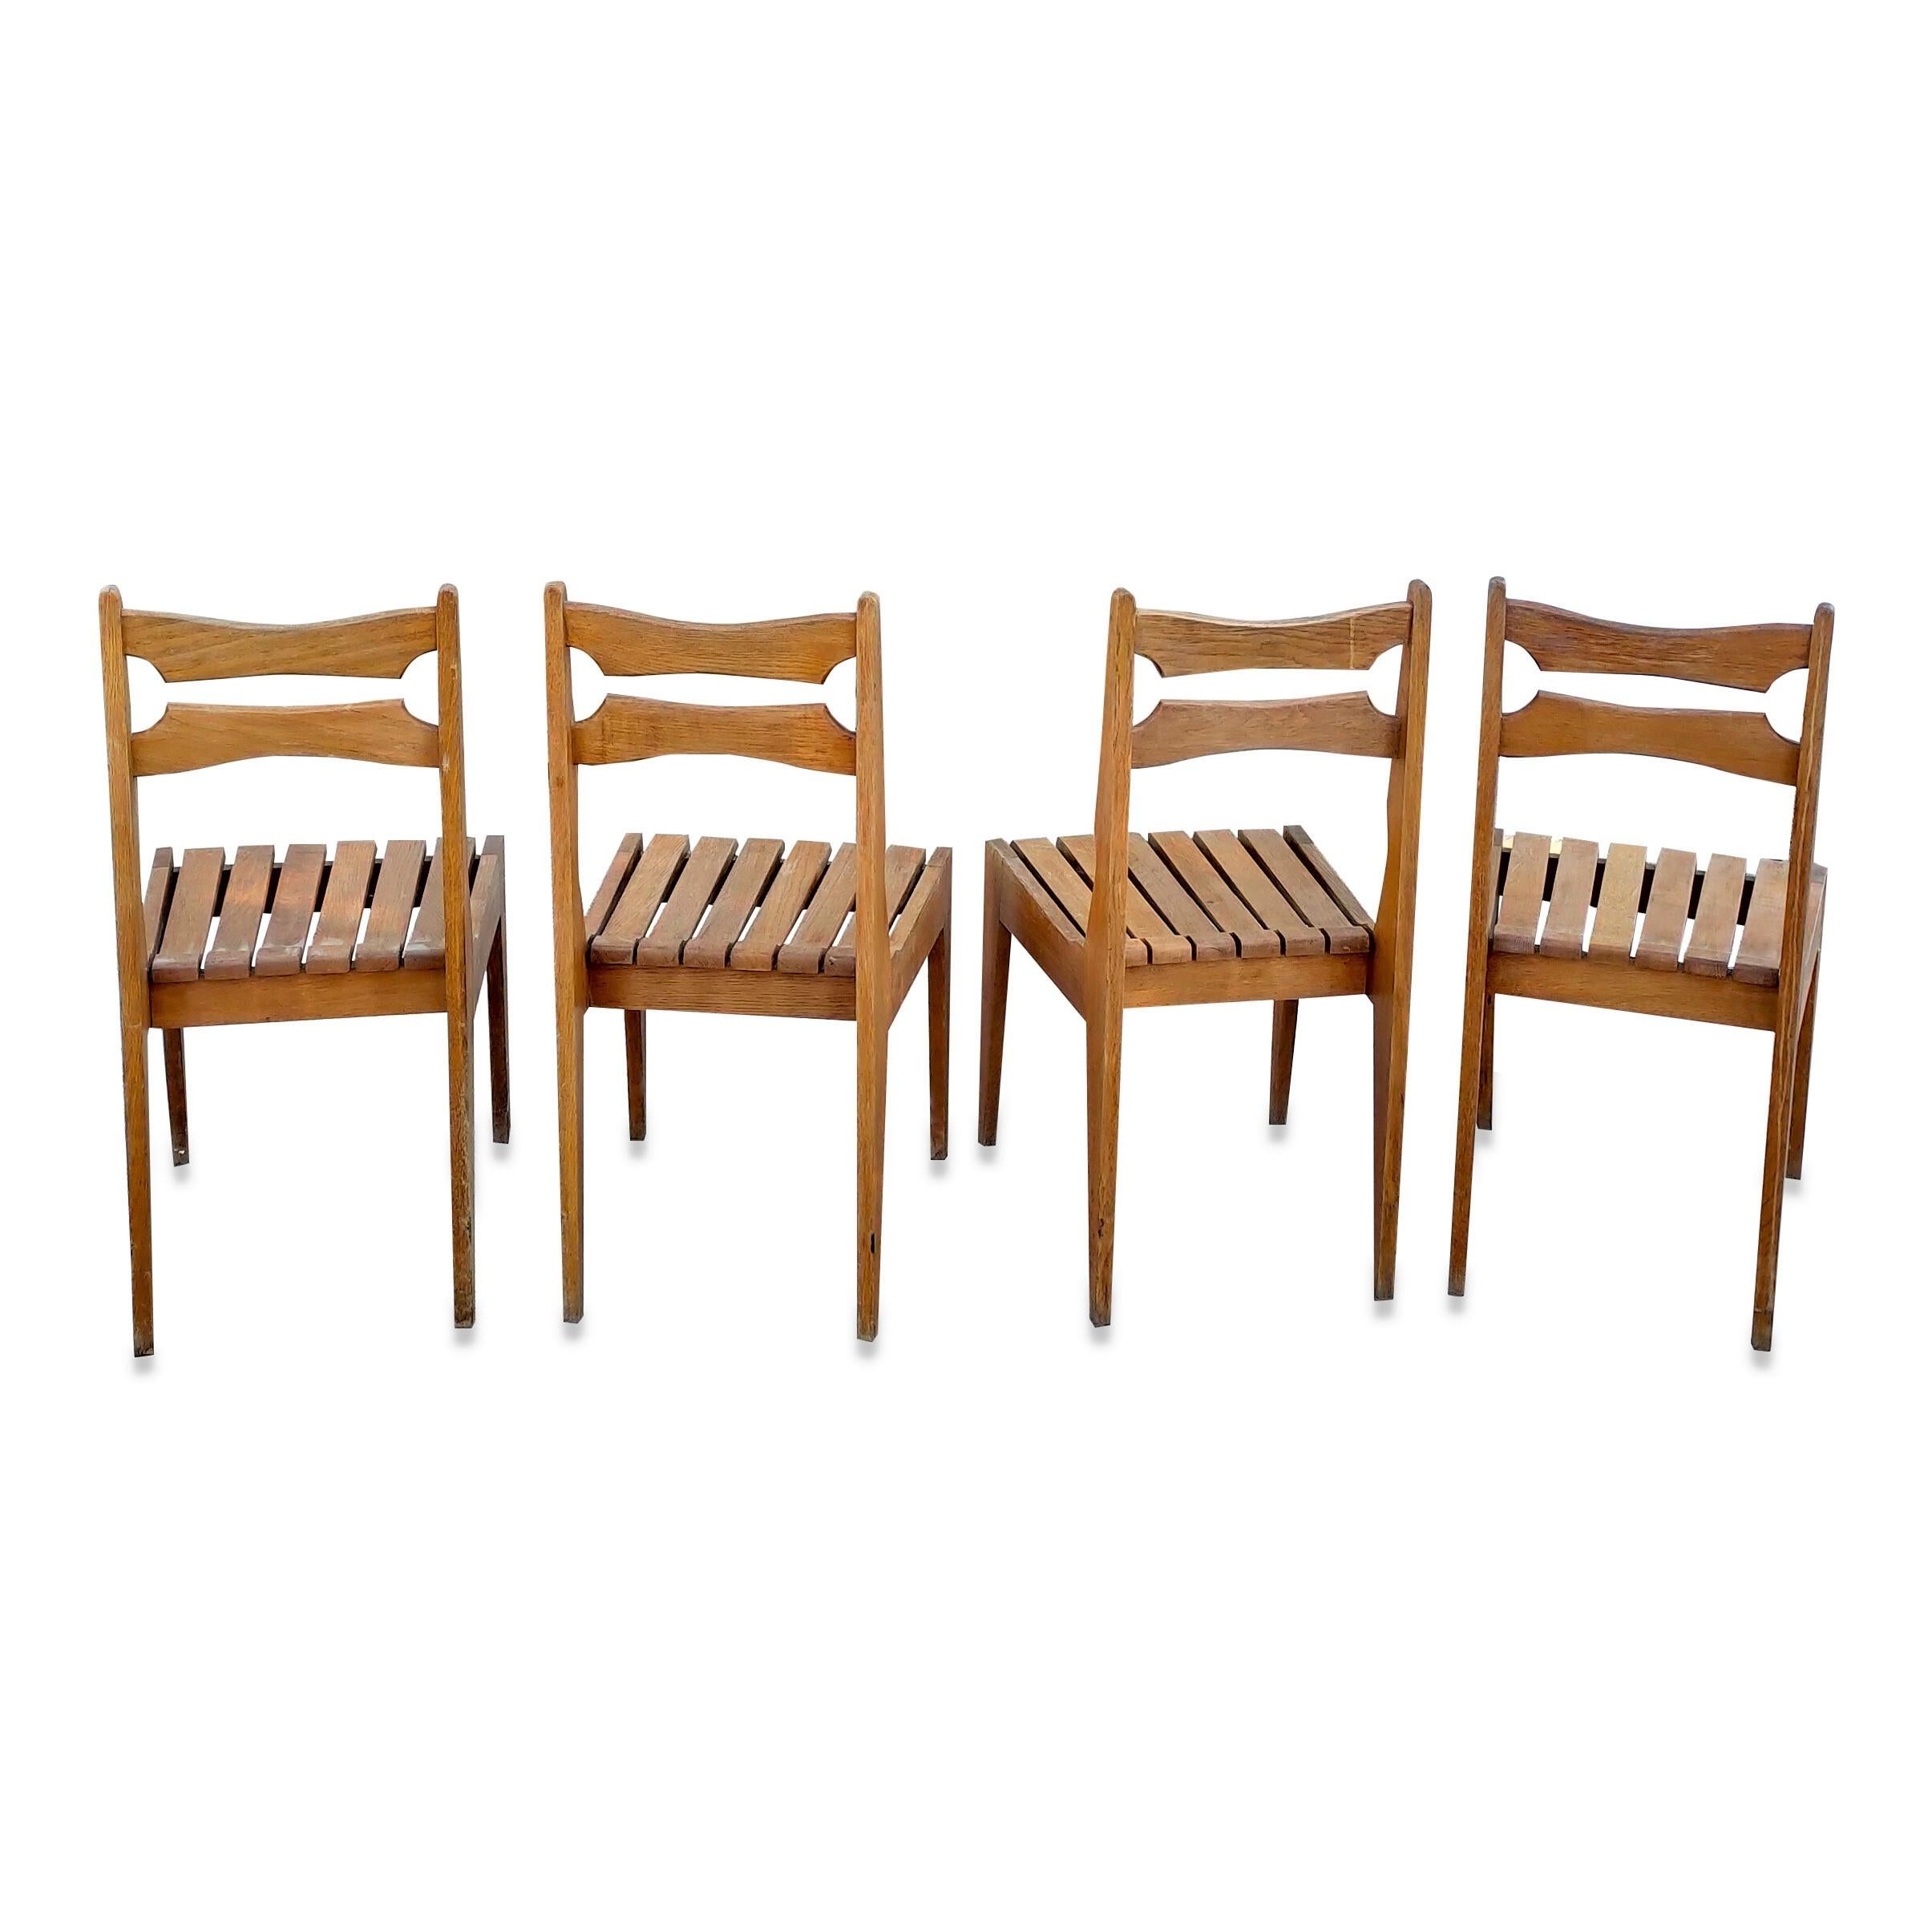 Mid-Century Modern Set of 4 Solid Oak Slats Chairs by Guillerme & Chambron, France, 1960s For Sale